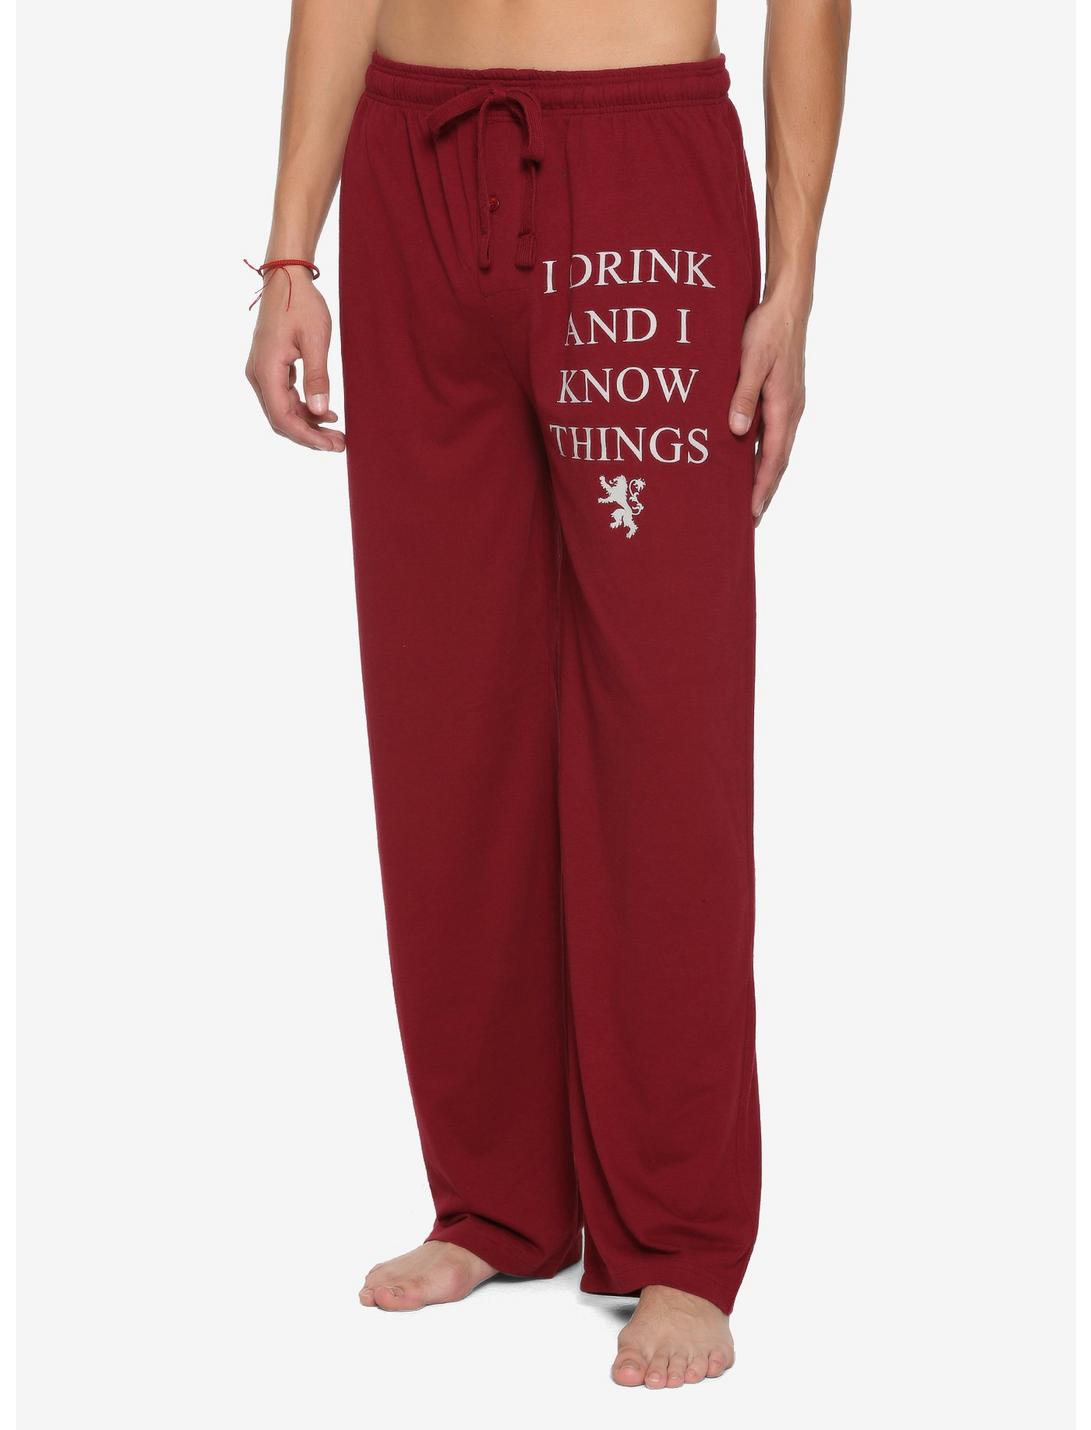 Game Of Thrones I Drink And I Know Things Tyrion Lannister Pajama Pants, RED, hi-res